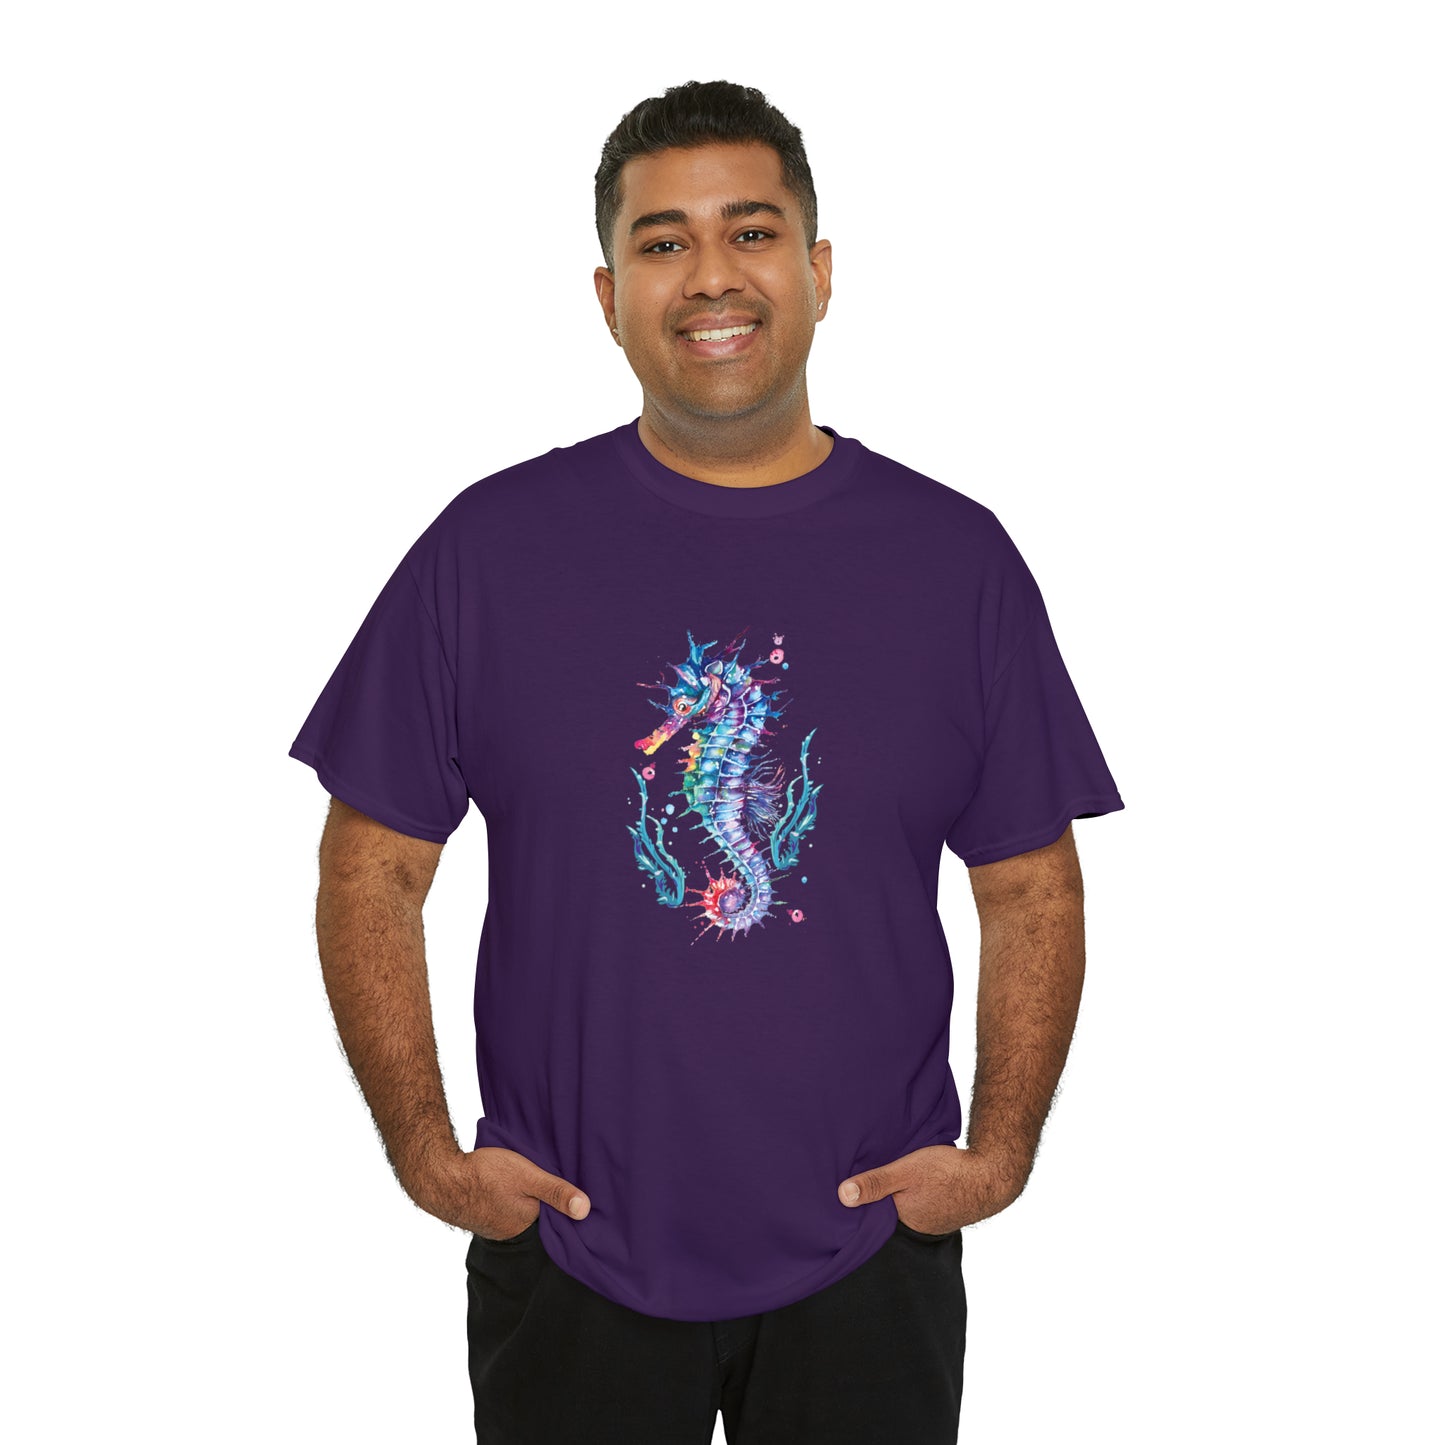 Mock up of a man wearing the Purple shirt